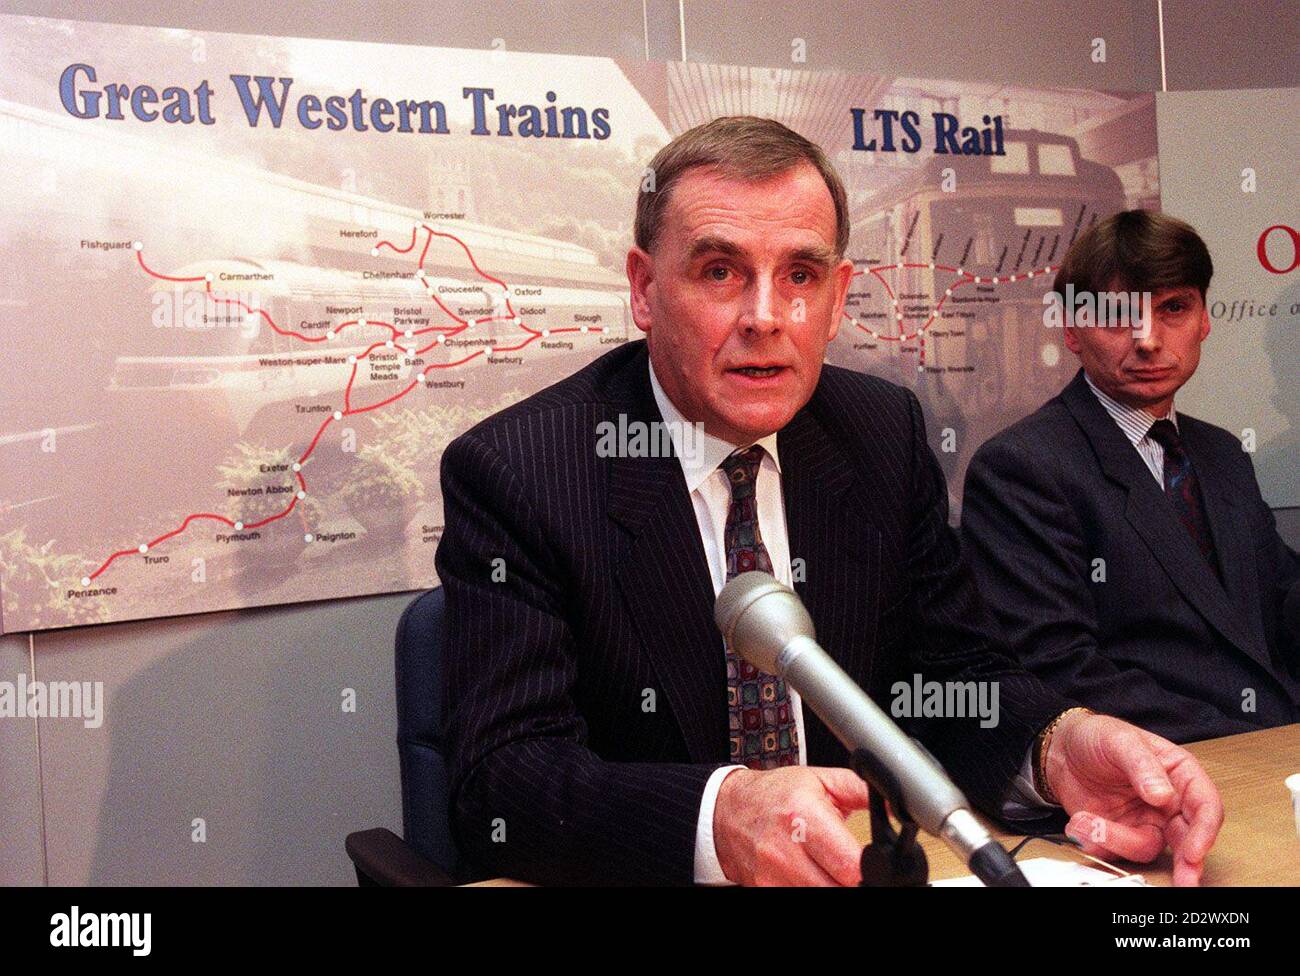 Chris Kinchin-Smith (right) of Enterprise Rail, winner of the franchise to run the train services on the London-Tilbury-Southend route, sits by Brian Scott, Managing Director of Great Western Trains Ltd, who will run services to Wales and the South West, at a news conference today (Wednesday) in London after the announcement by the Franchise Director that the two companies have been awarded the latest franchise contracts in the continuing privatisation of the railway network. Stock Photo